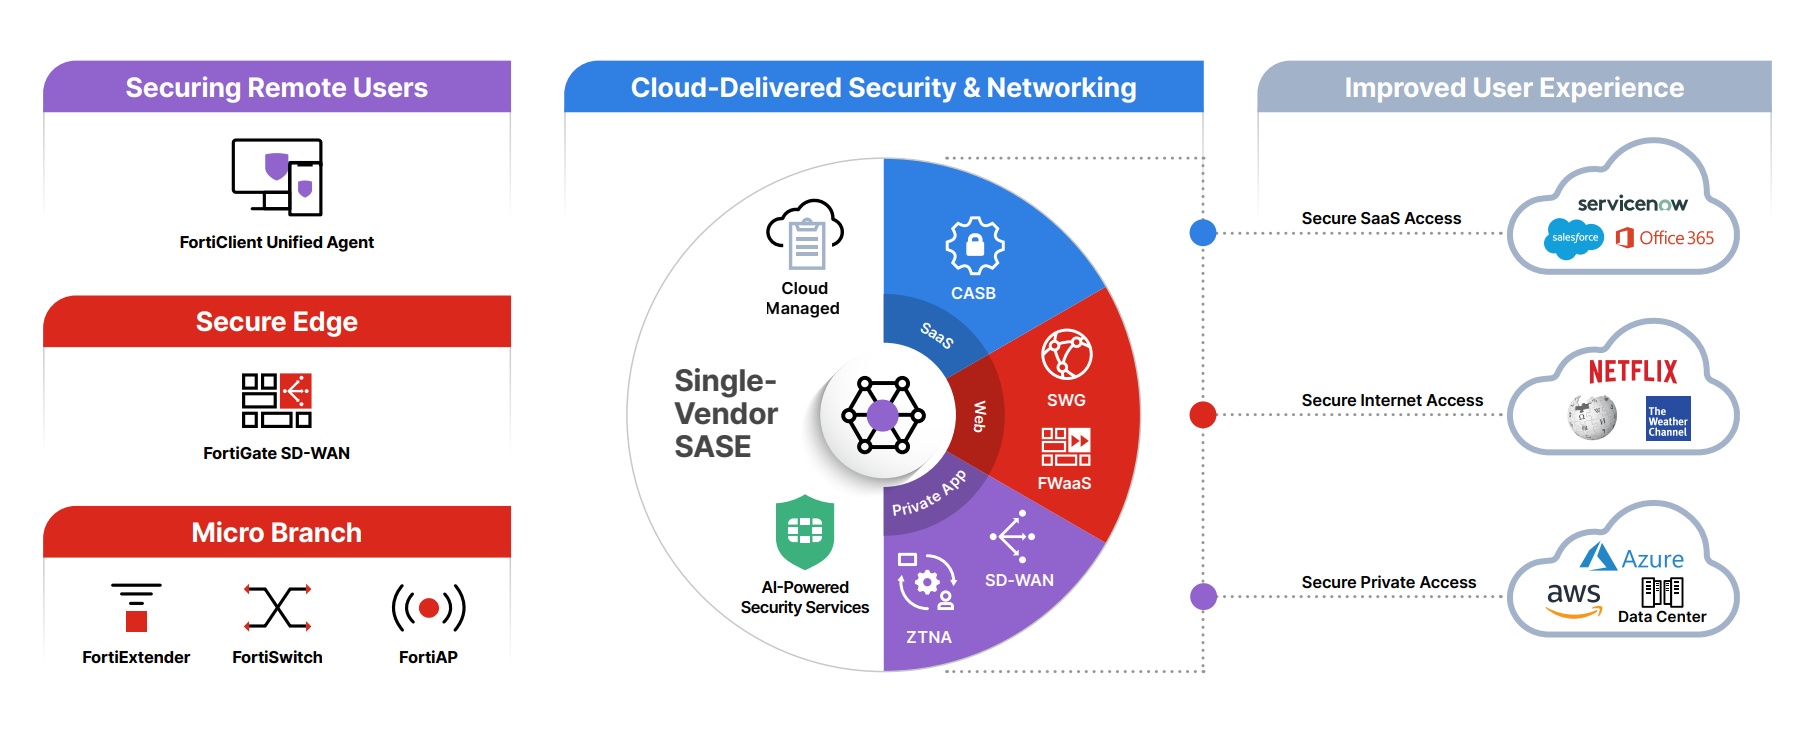 fortinet expands its global sase points of presence with google cloud